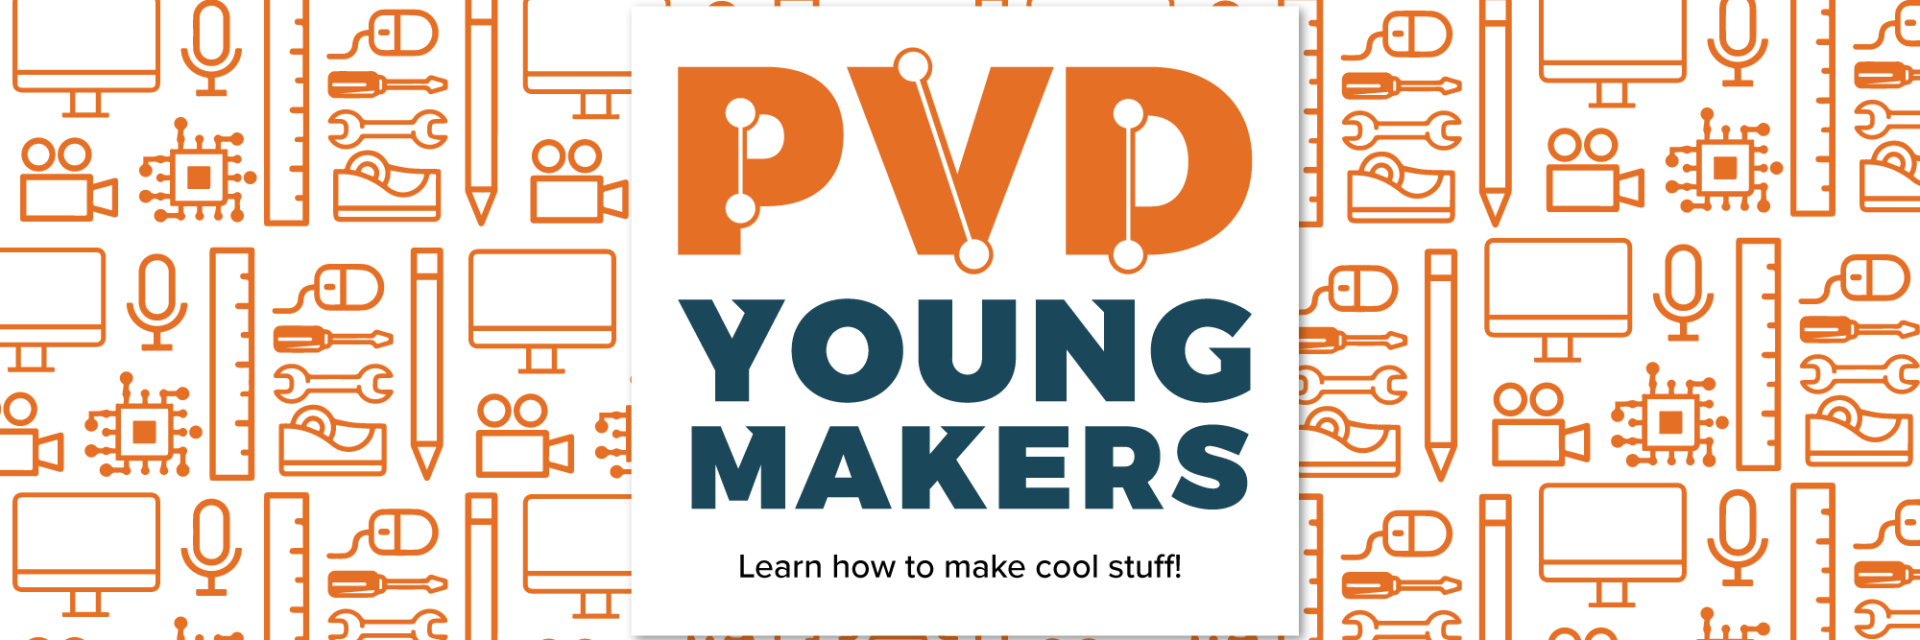 PVD Young Makers - Providence Public Library